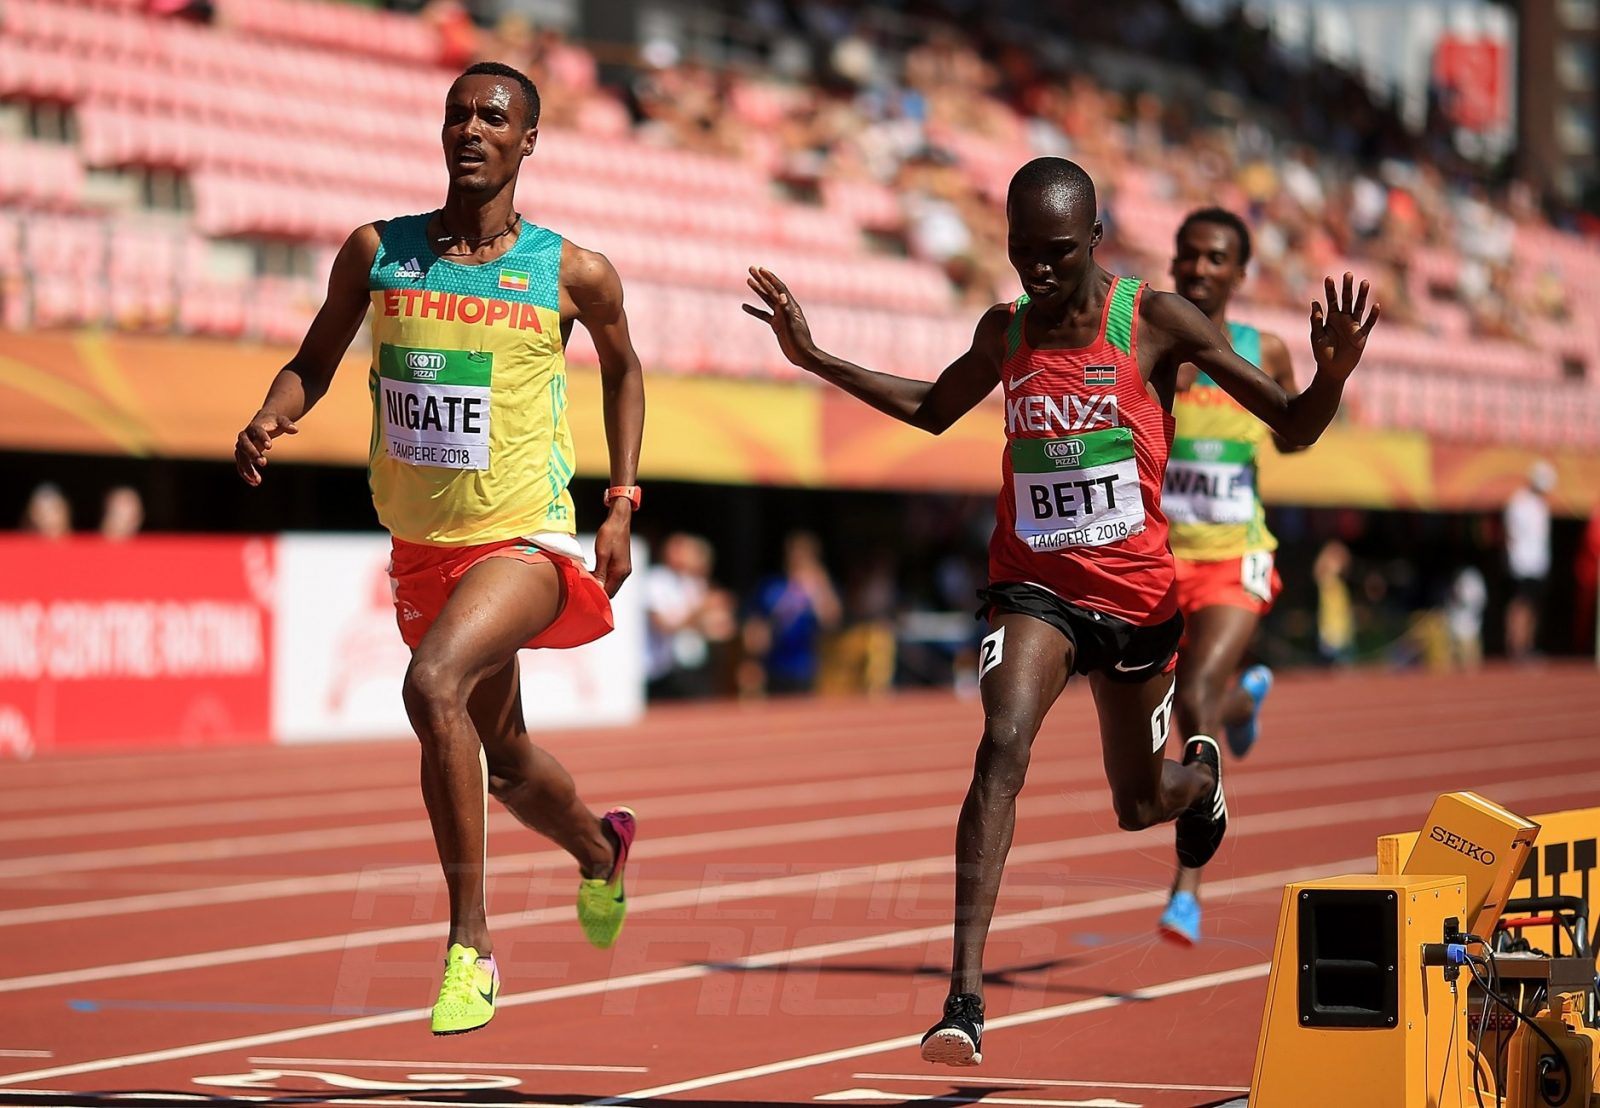 Takele Nigate of Ethiopia outsprints Kenyan Leonard Bett to win the men's 3000m steeplechase at the IAAF World U20 Championships Tampere 2018 / Photo Credit: Getty for the IAAF